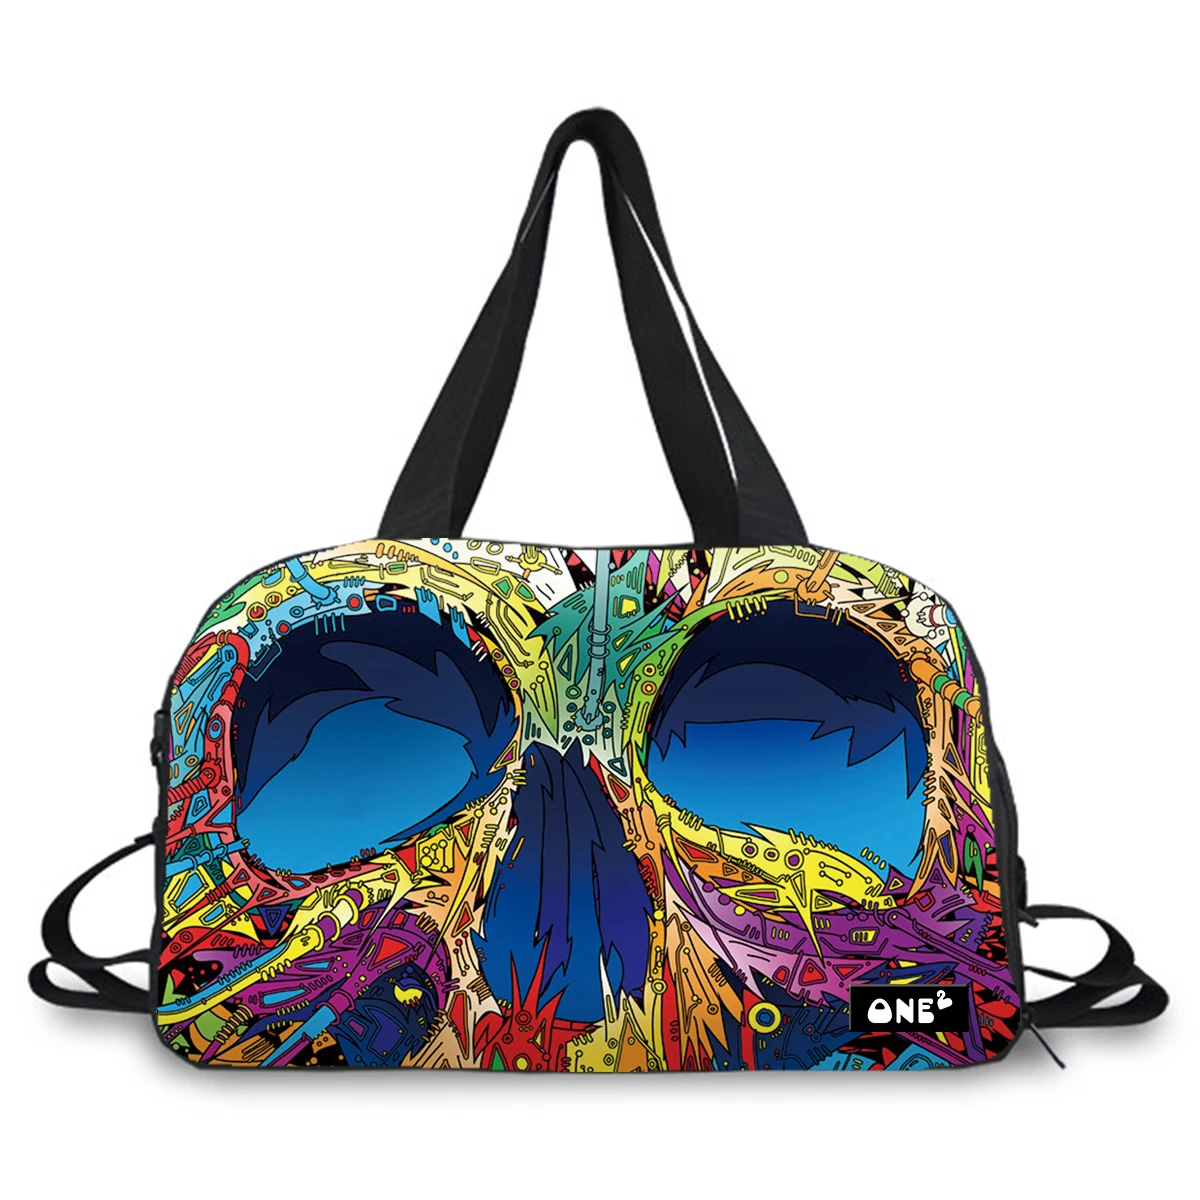 

Sac de voyage original good quality best price travel bags luggage duffel large capacity duffle bag sport skull print, Any color is available